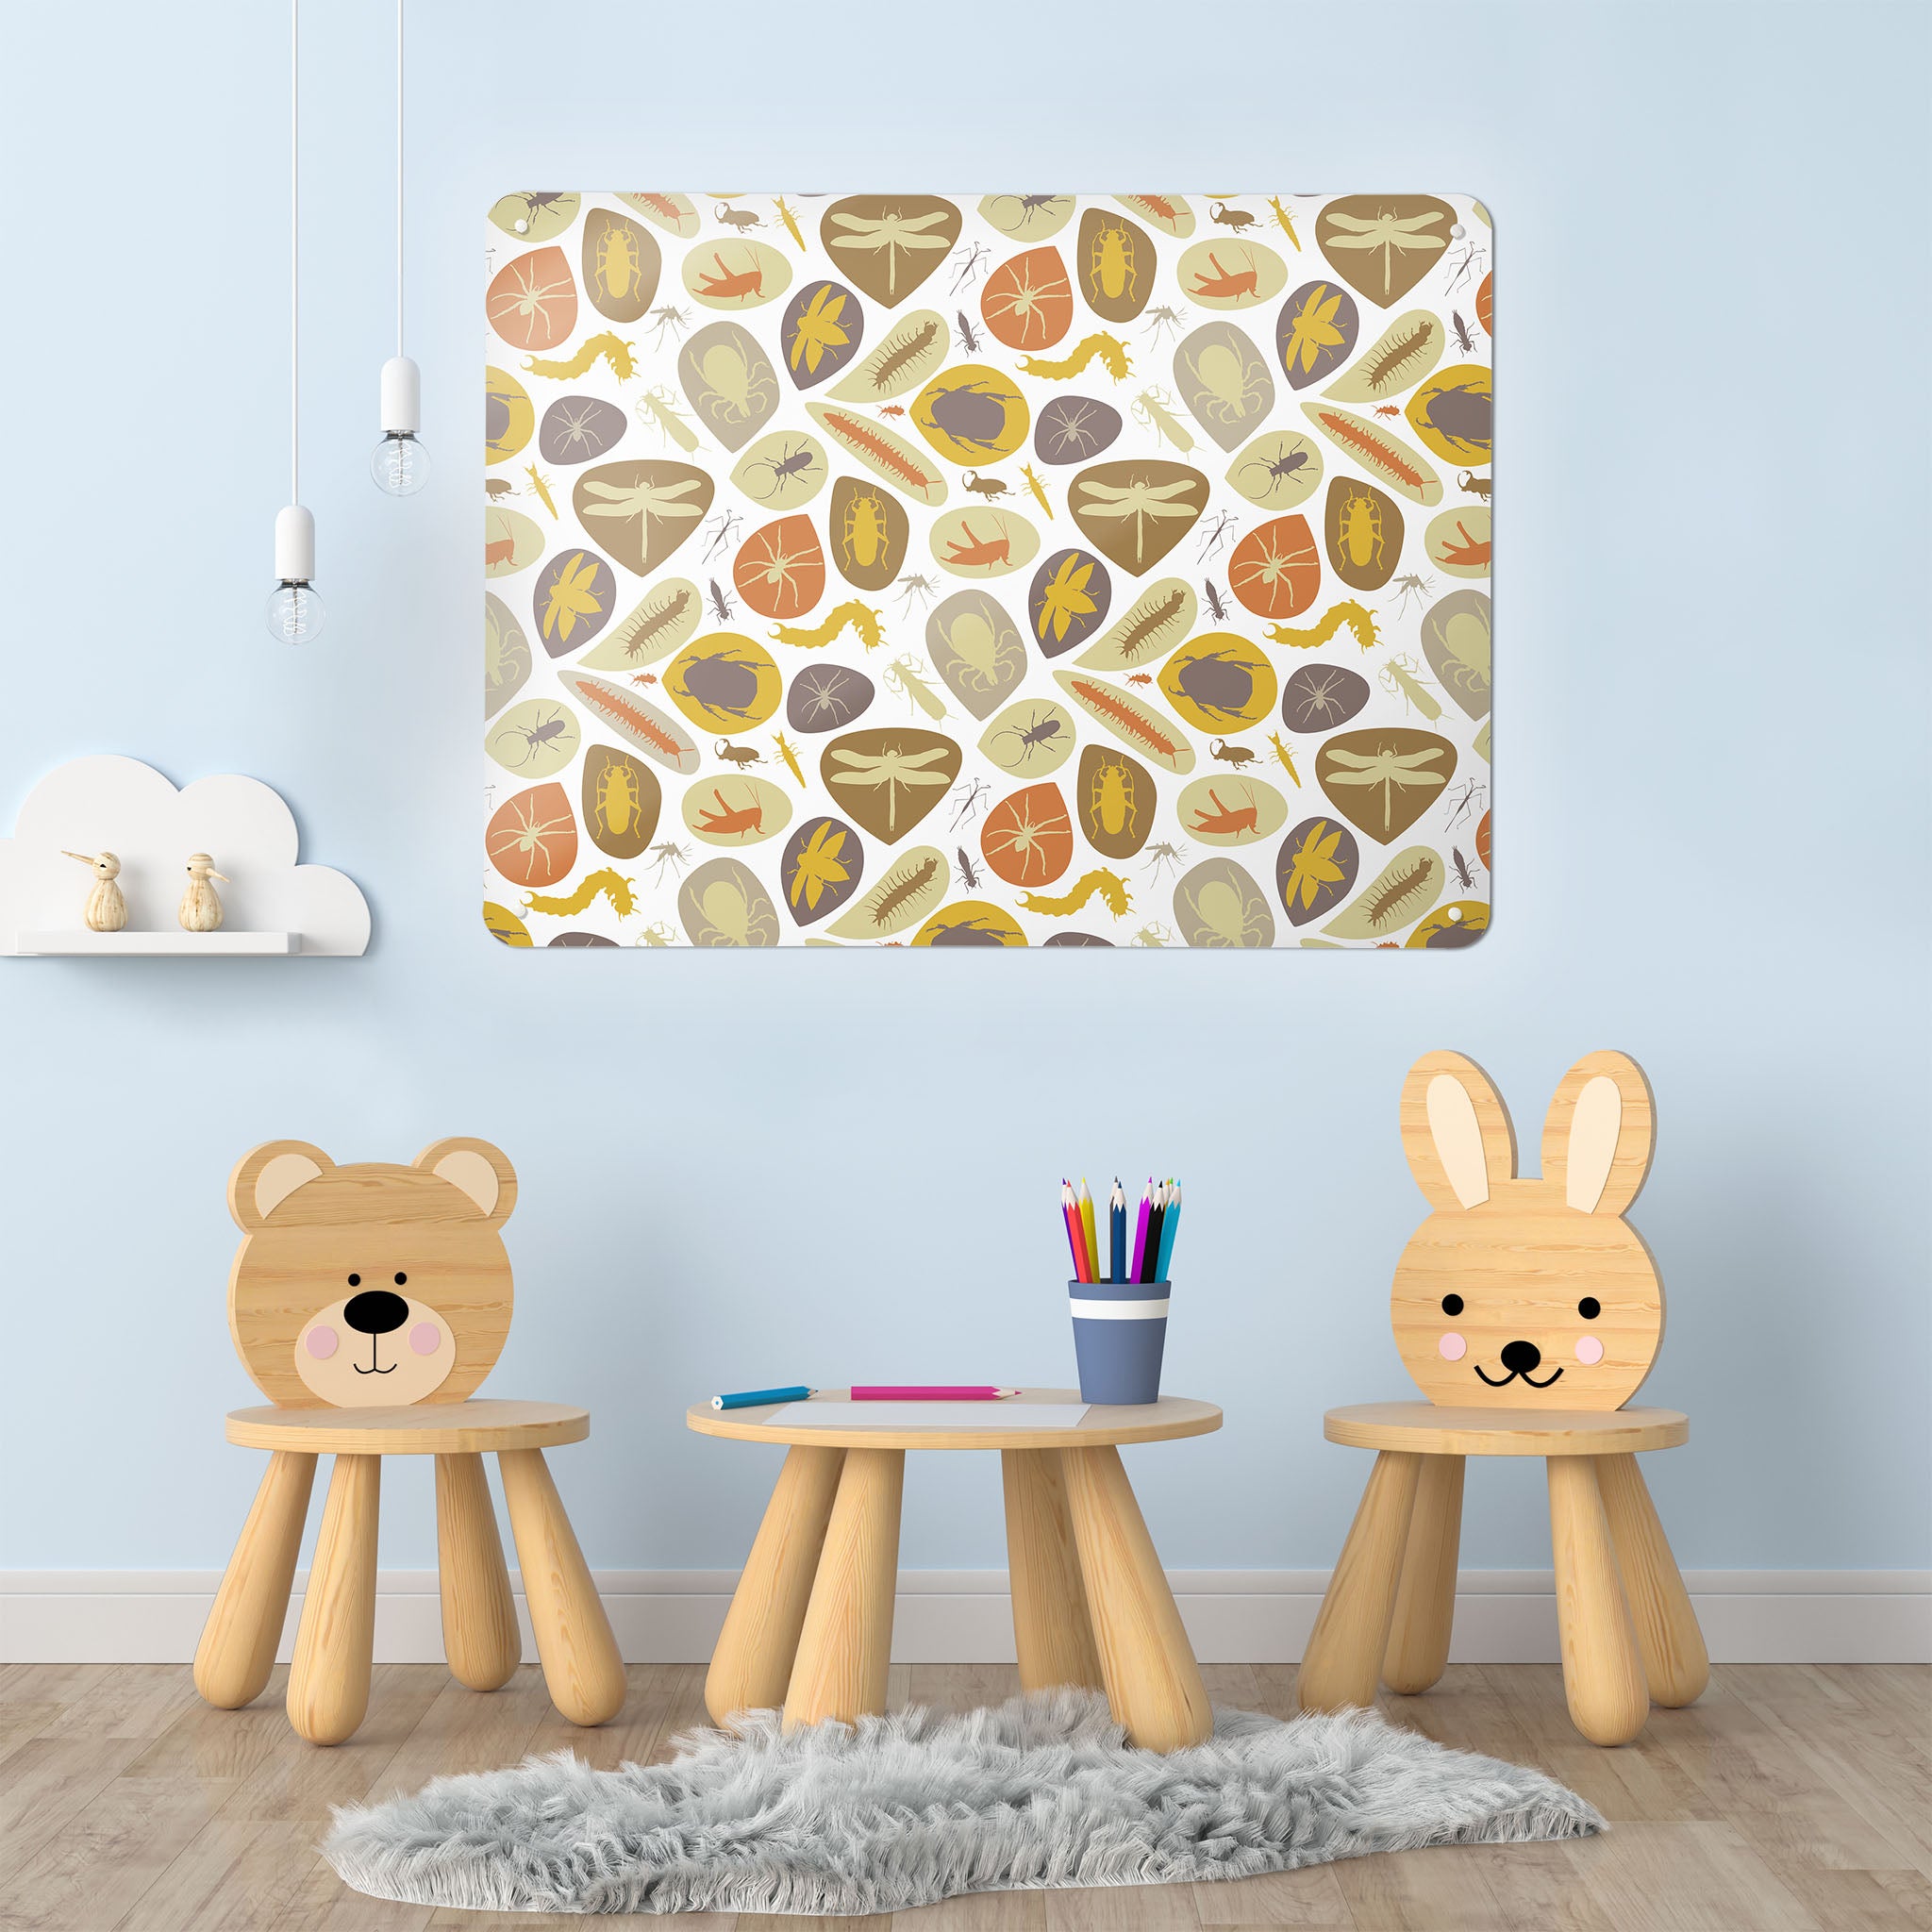 A playroom  interior with a magnetic metal wall art panel showing a bugs design in earthy colours